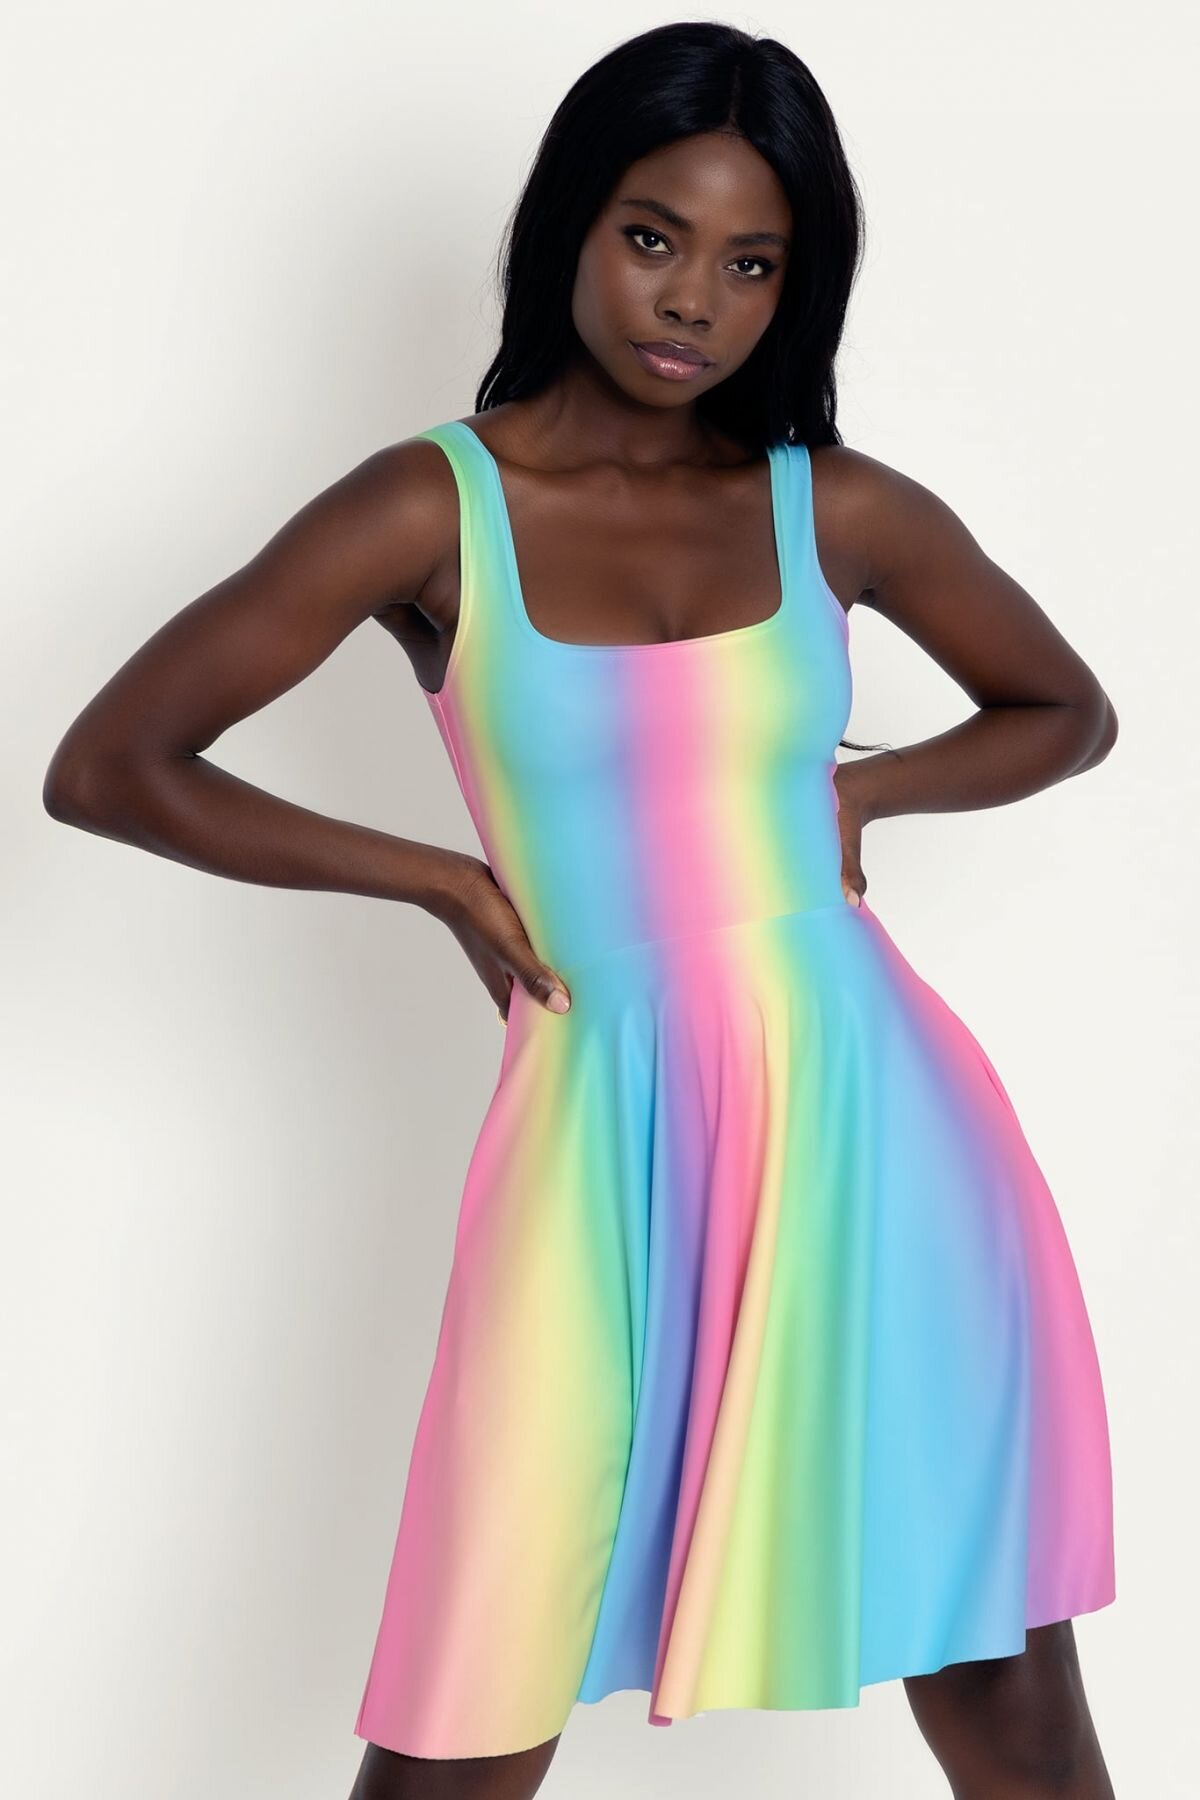 Black Milk Clothing Has The Barbie Collection Of Your Dreams